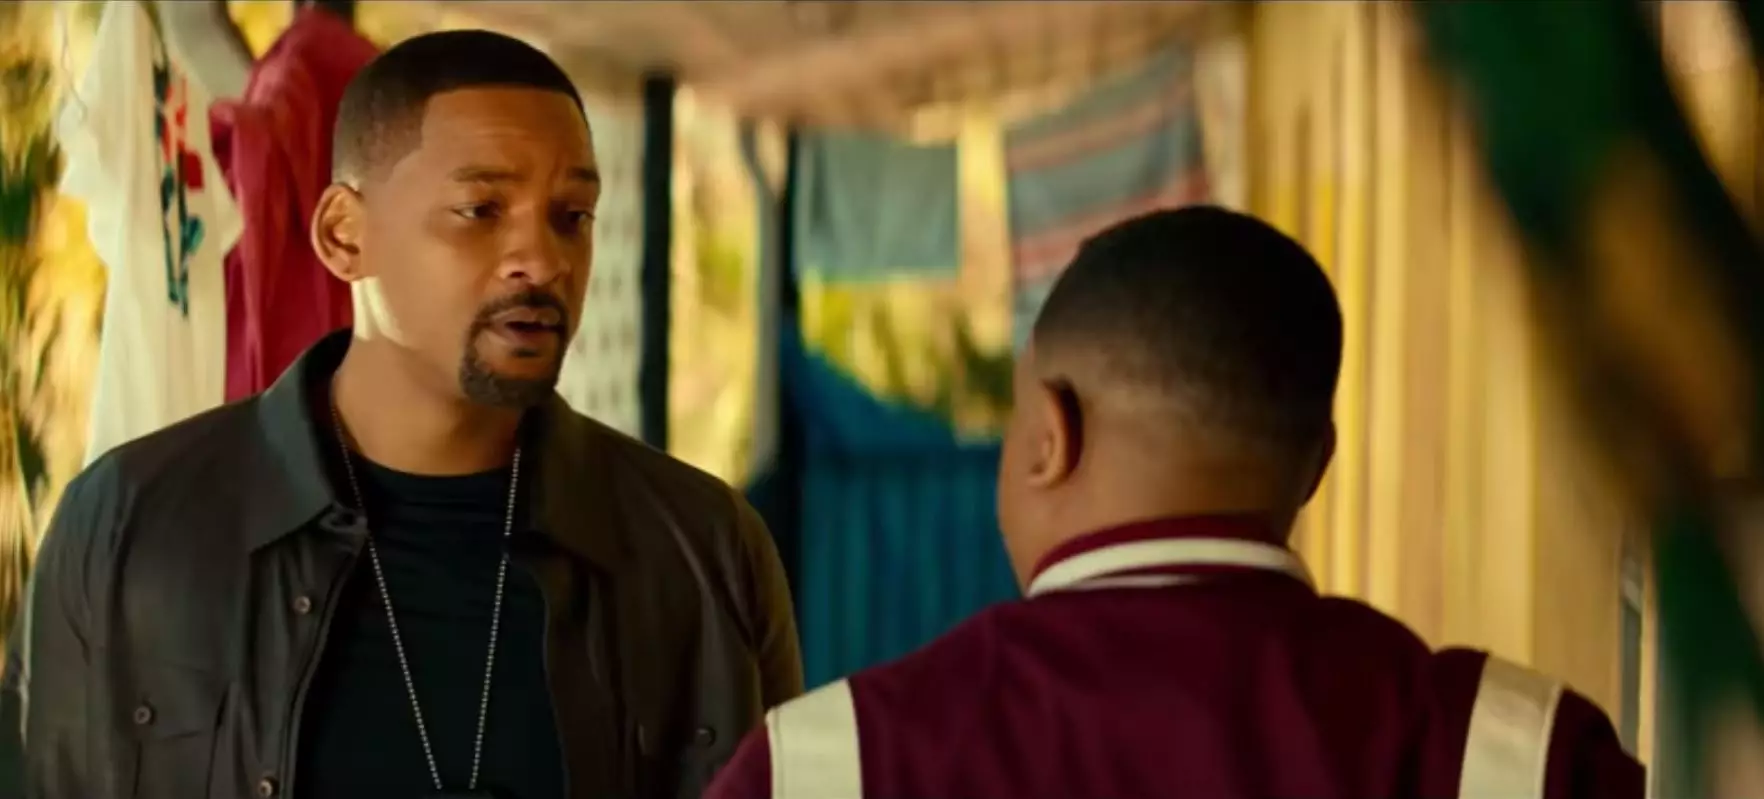 Will Smith Returns To Our Screens In Bad Boys For Life.